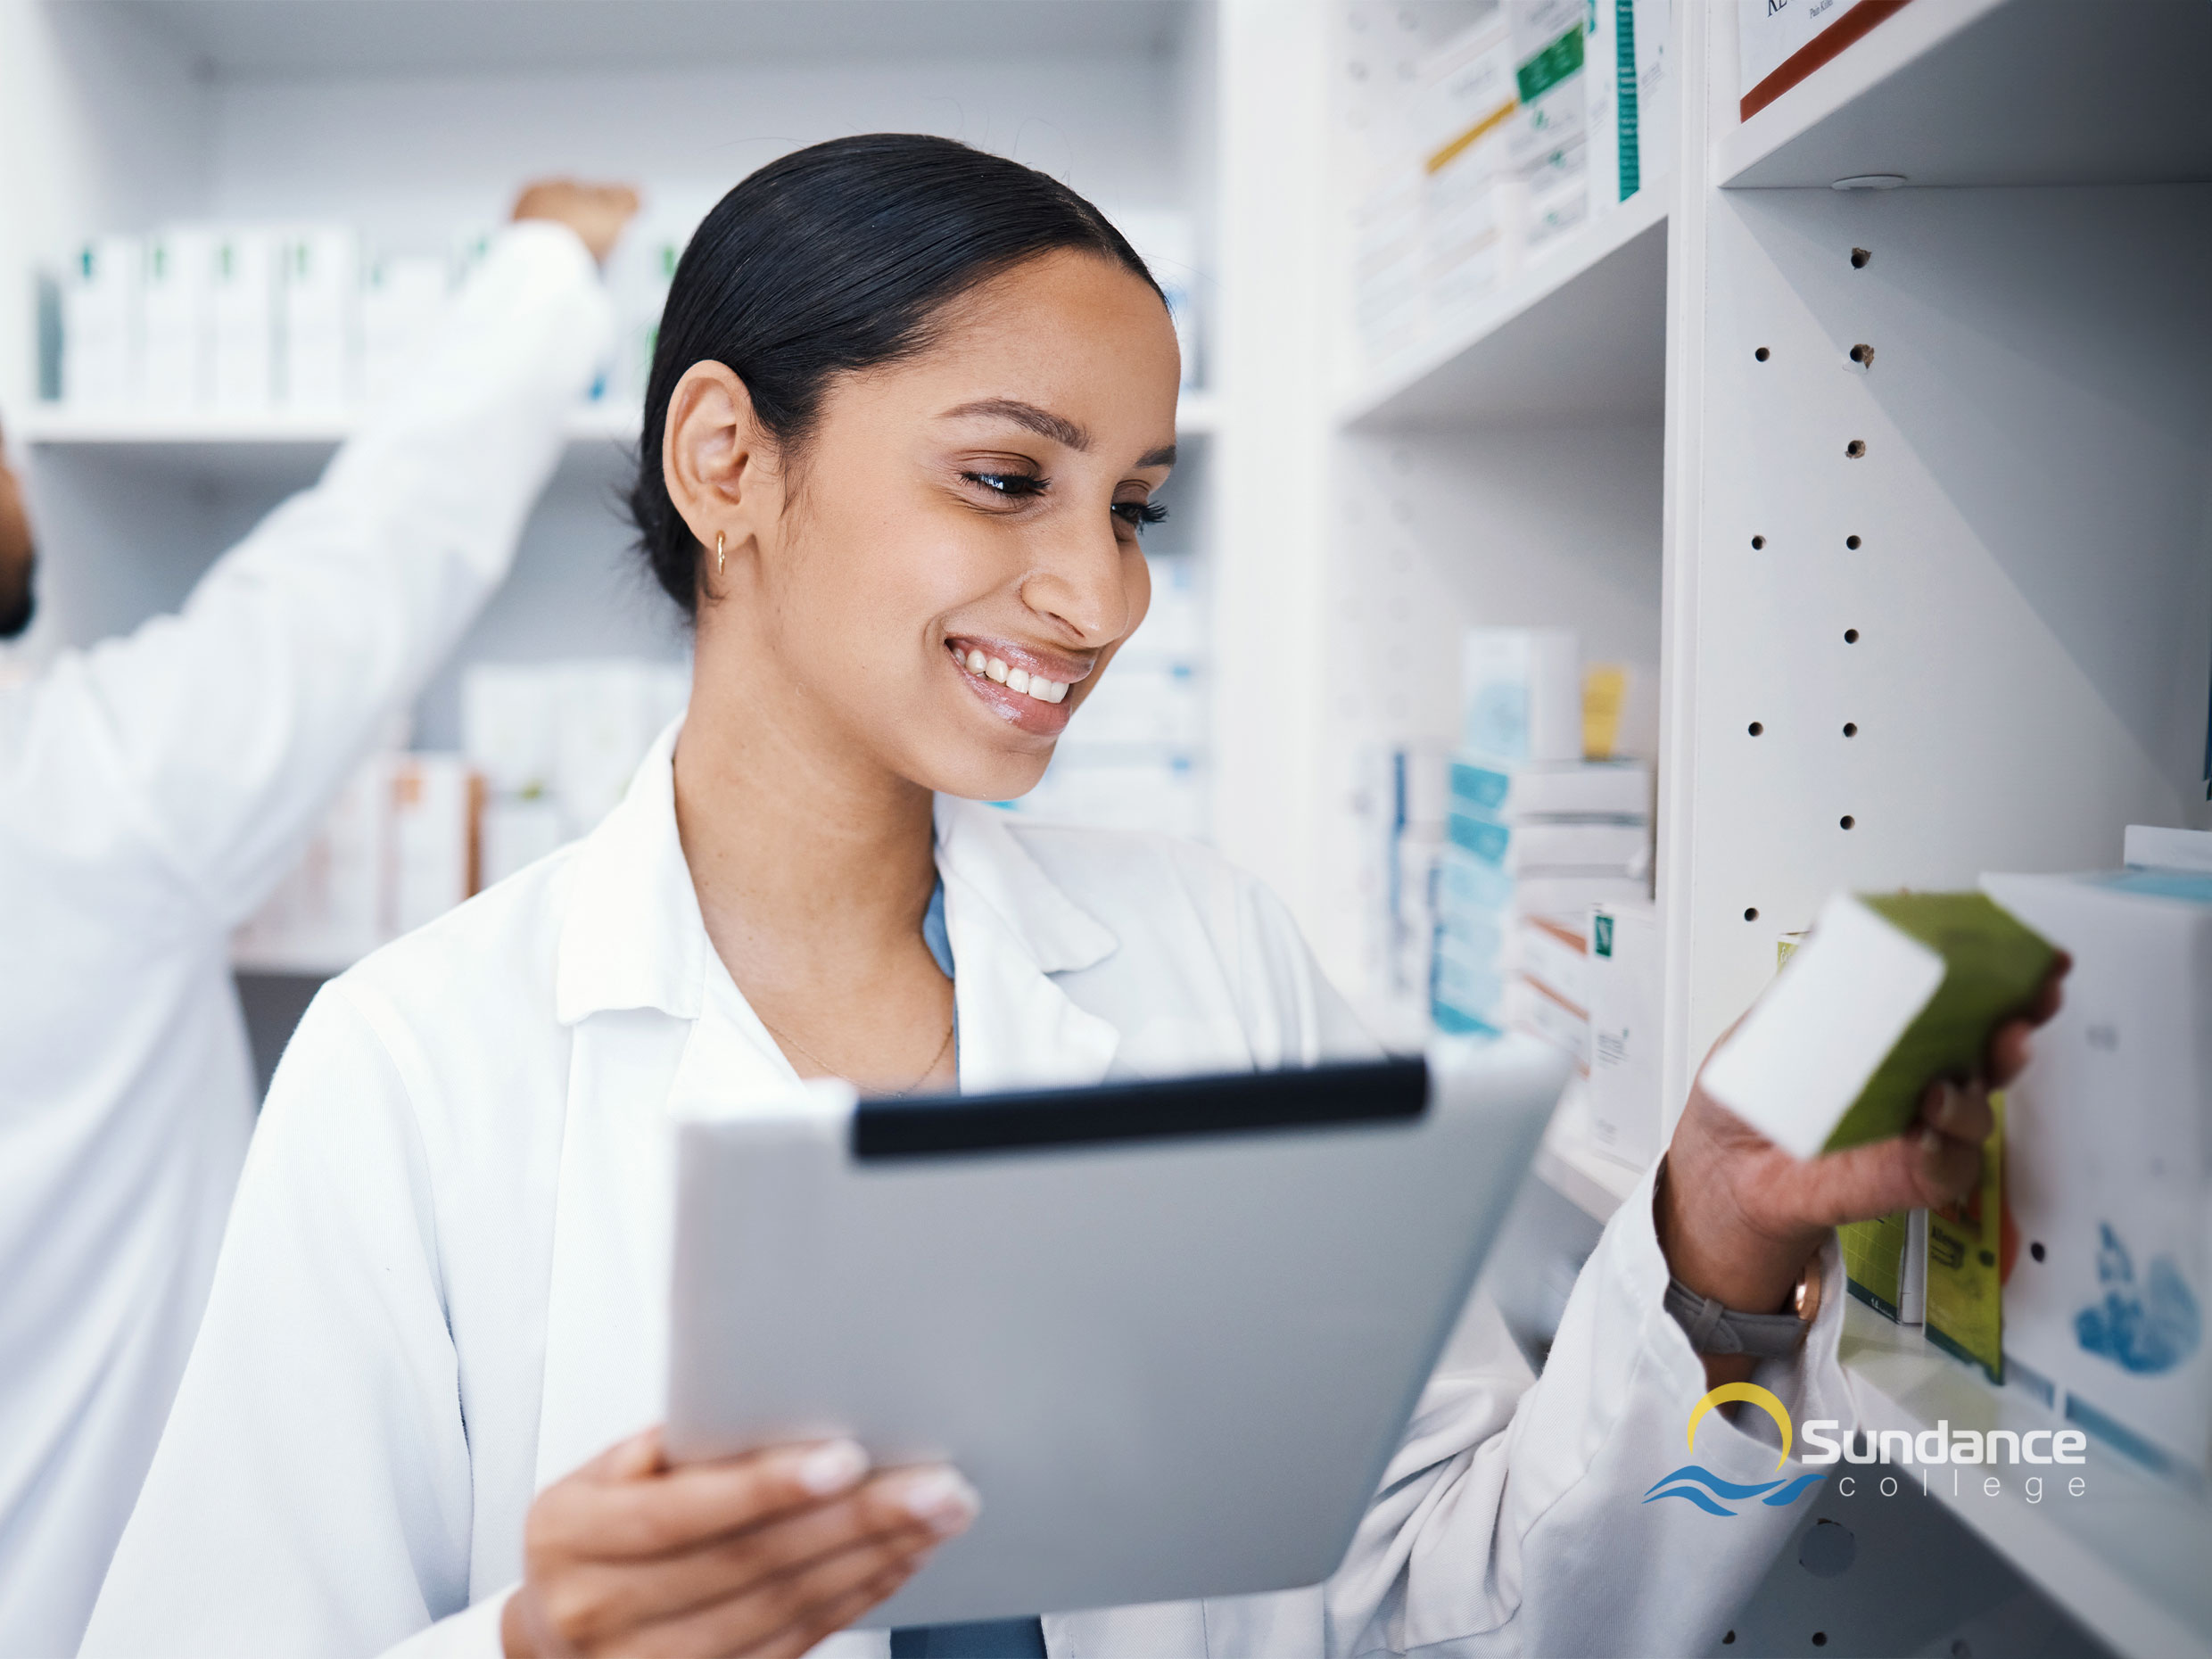 Pharmacy Assistant helping pharmacist find the right medication.